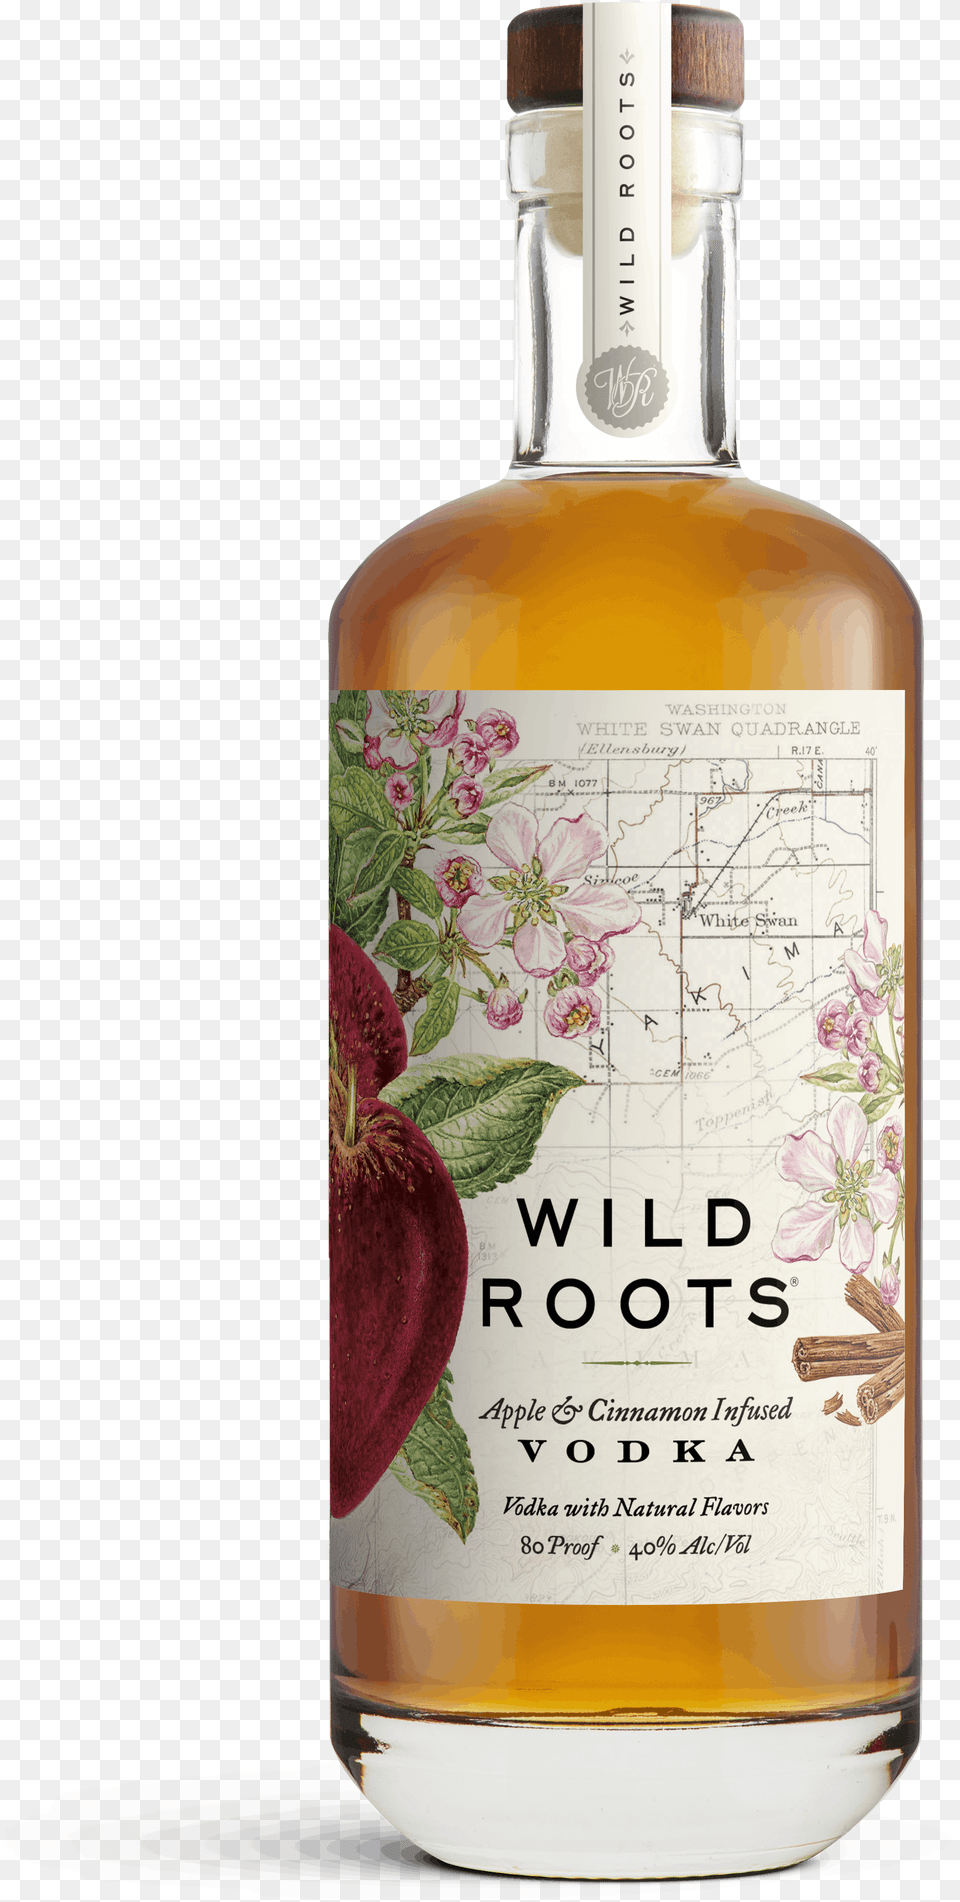 Wild Roots Apple Amp Cinnamon Infused Vodka Wild Roots Cucumber Grapefruit Gin, Alcohol, Beverage, Liquor, Bottle Png